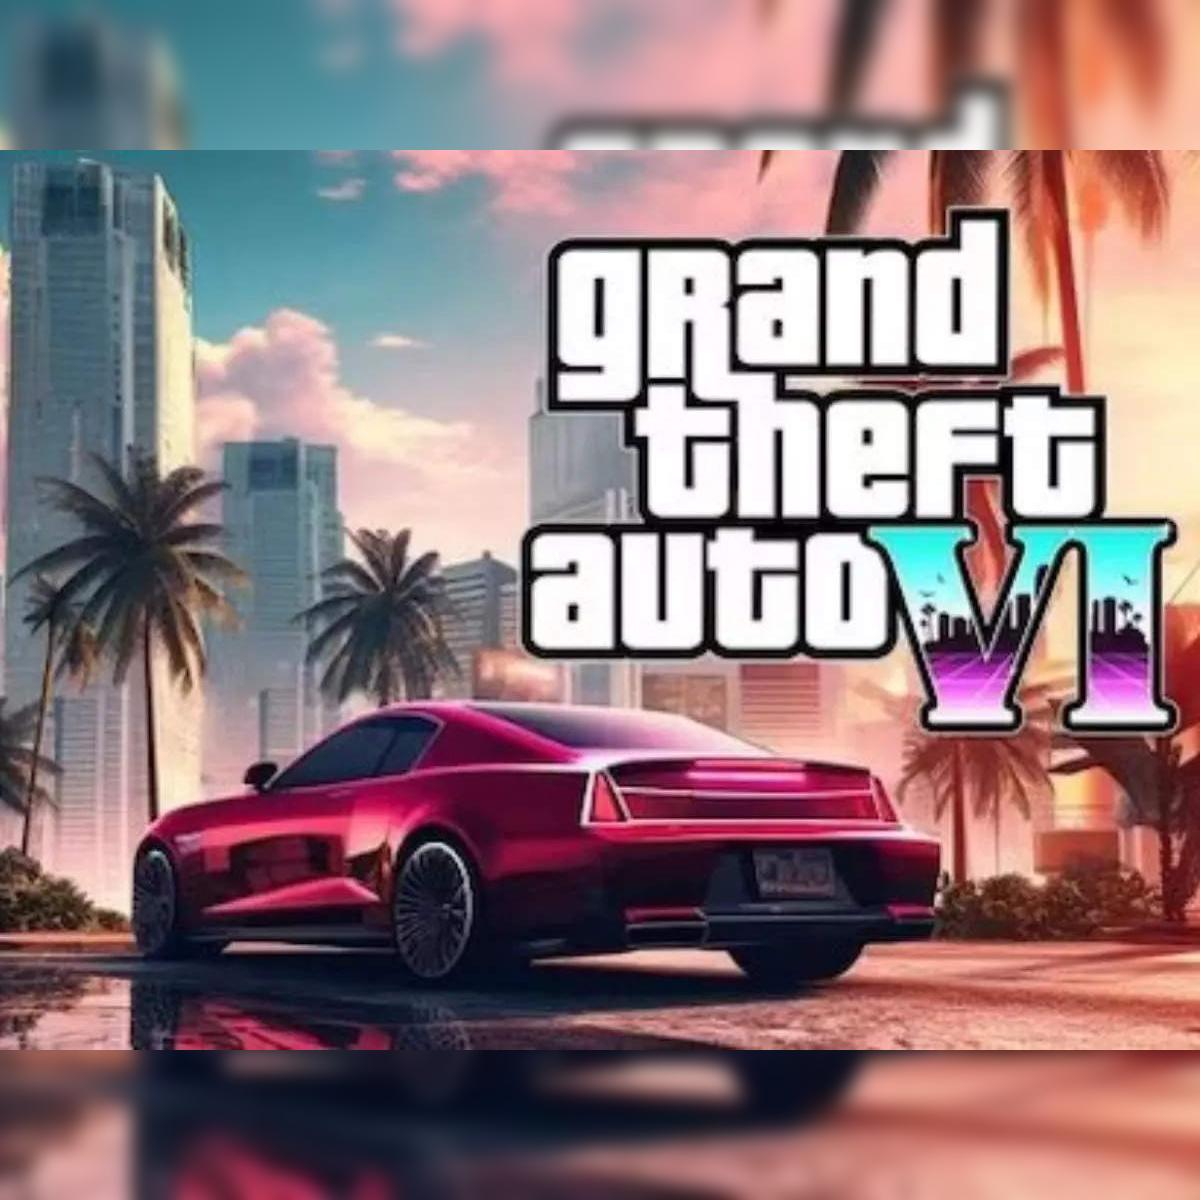 GTA 6: Do video games lead to healthier lifestyle changes? 'GTA 6